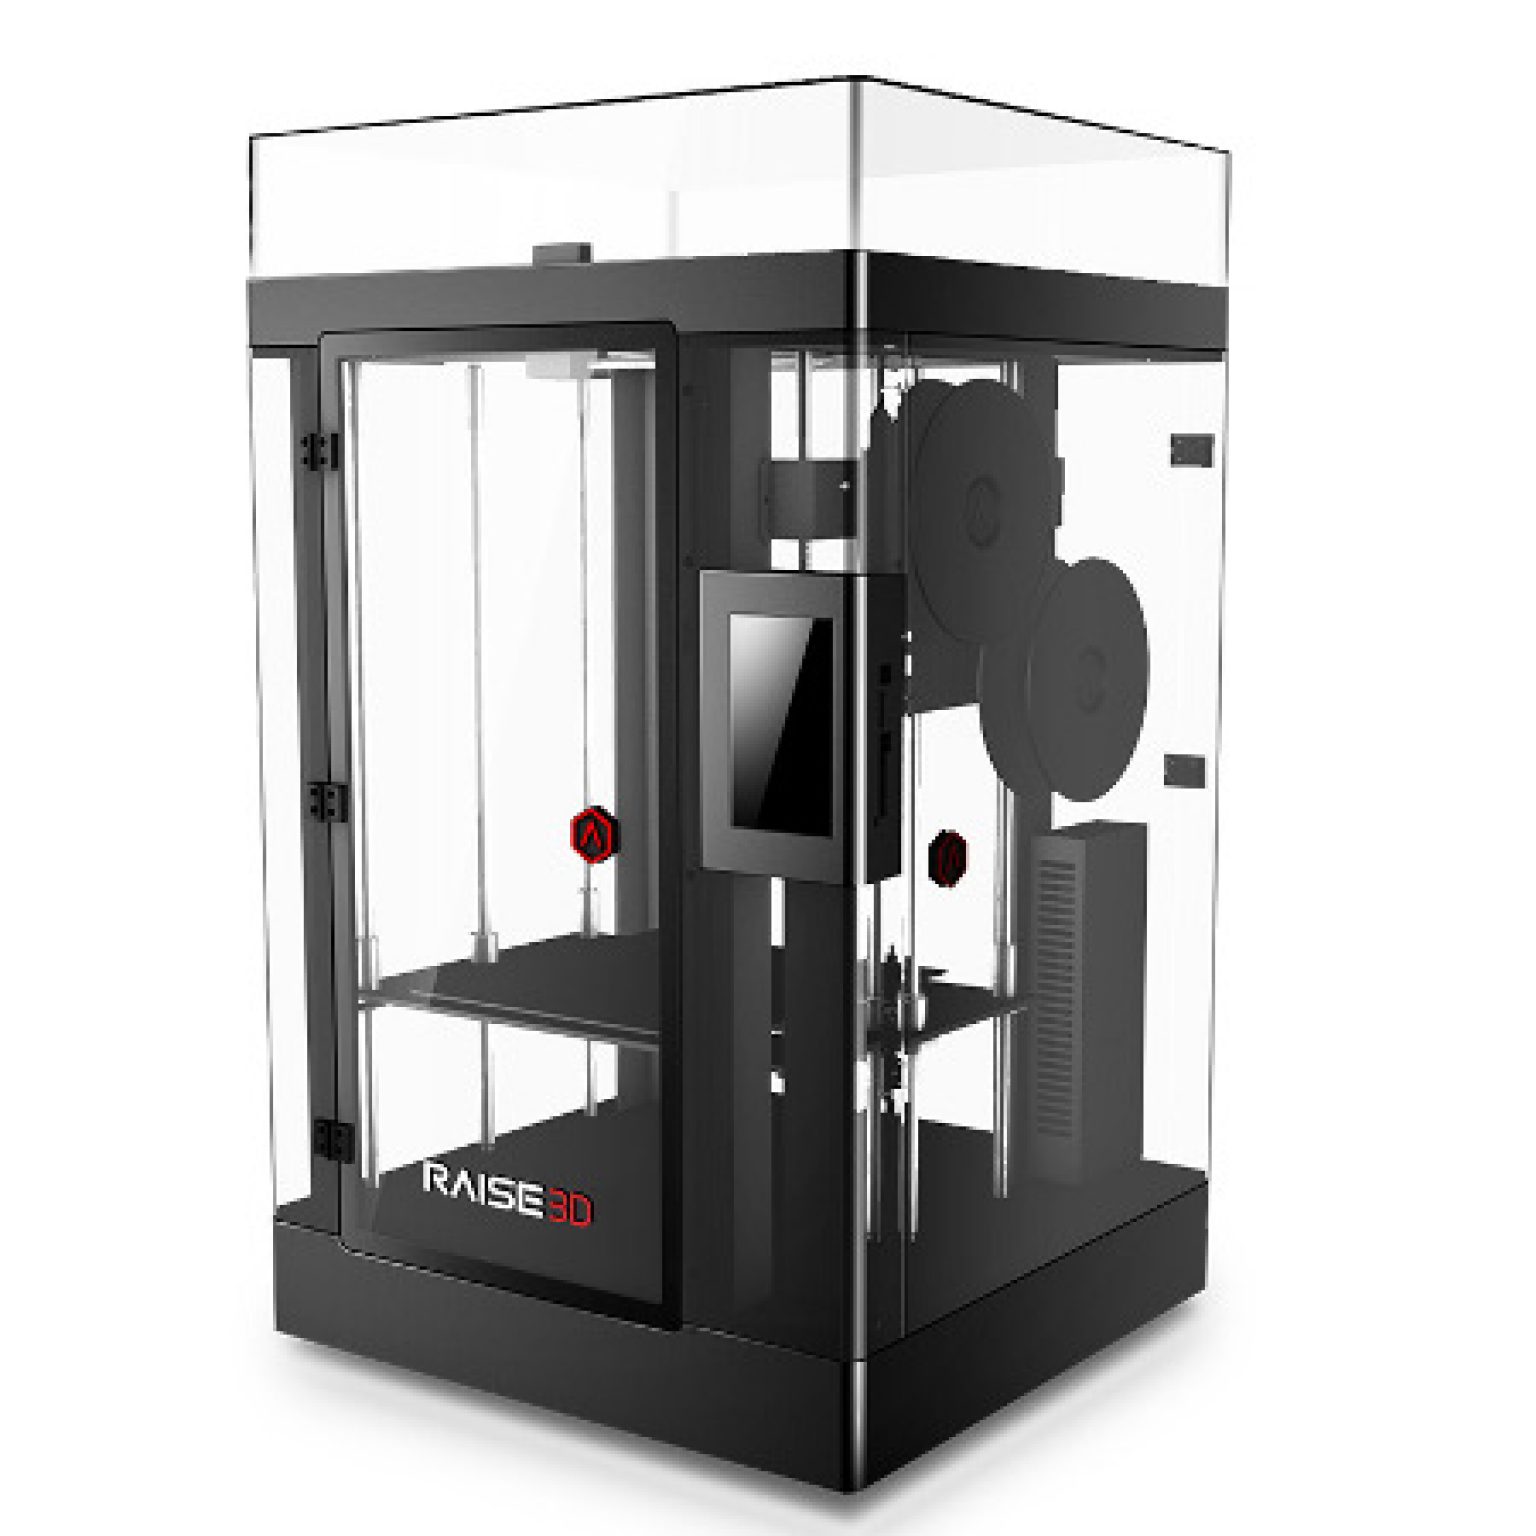 15 Best Large 3D Printers Buying Guide of 2021 Pick 3D Printer